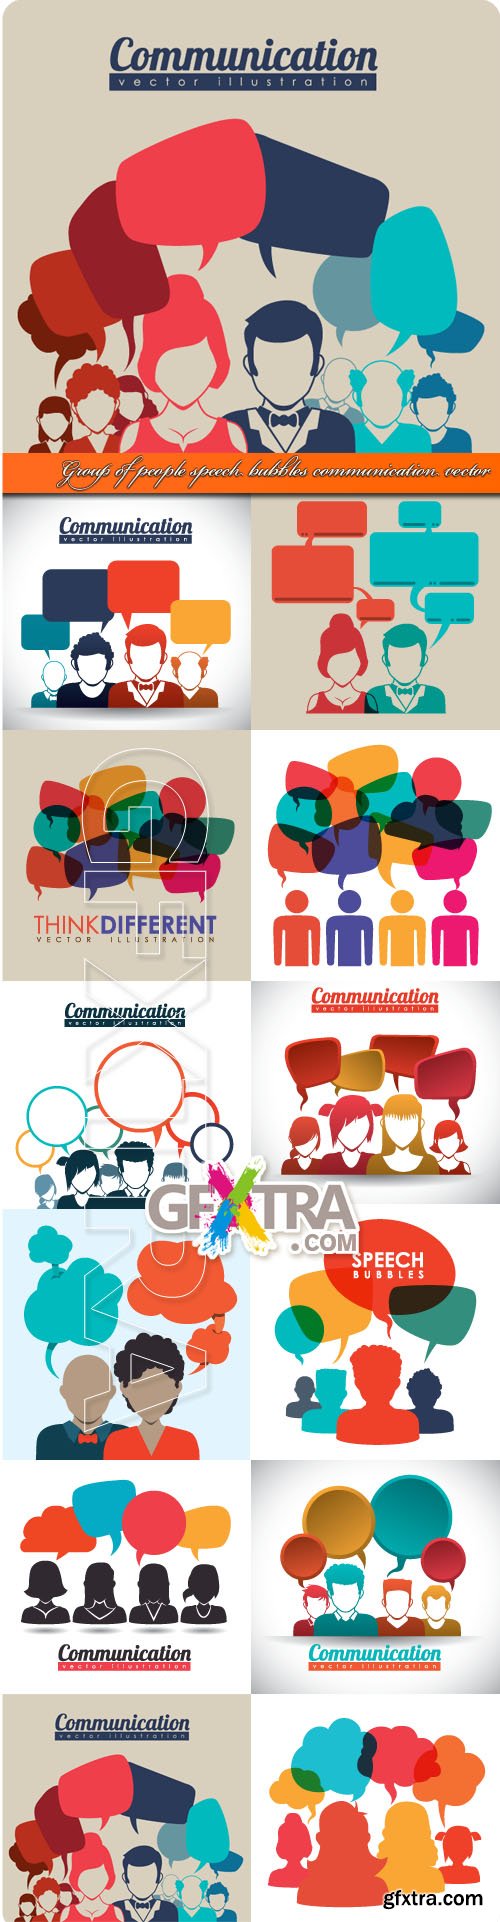 Group of people speech bubbles communication vector